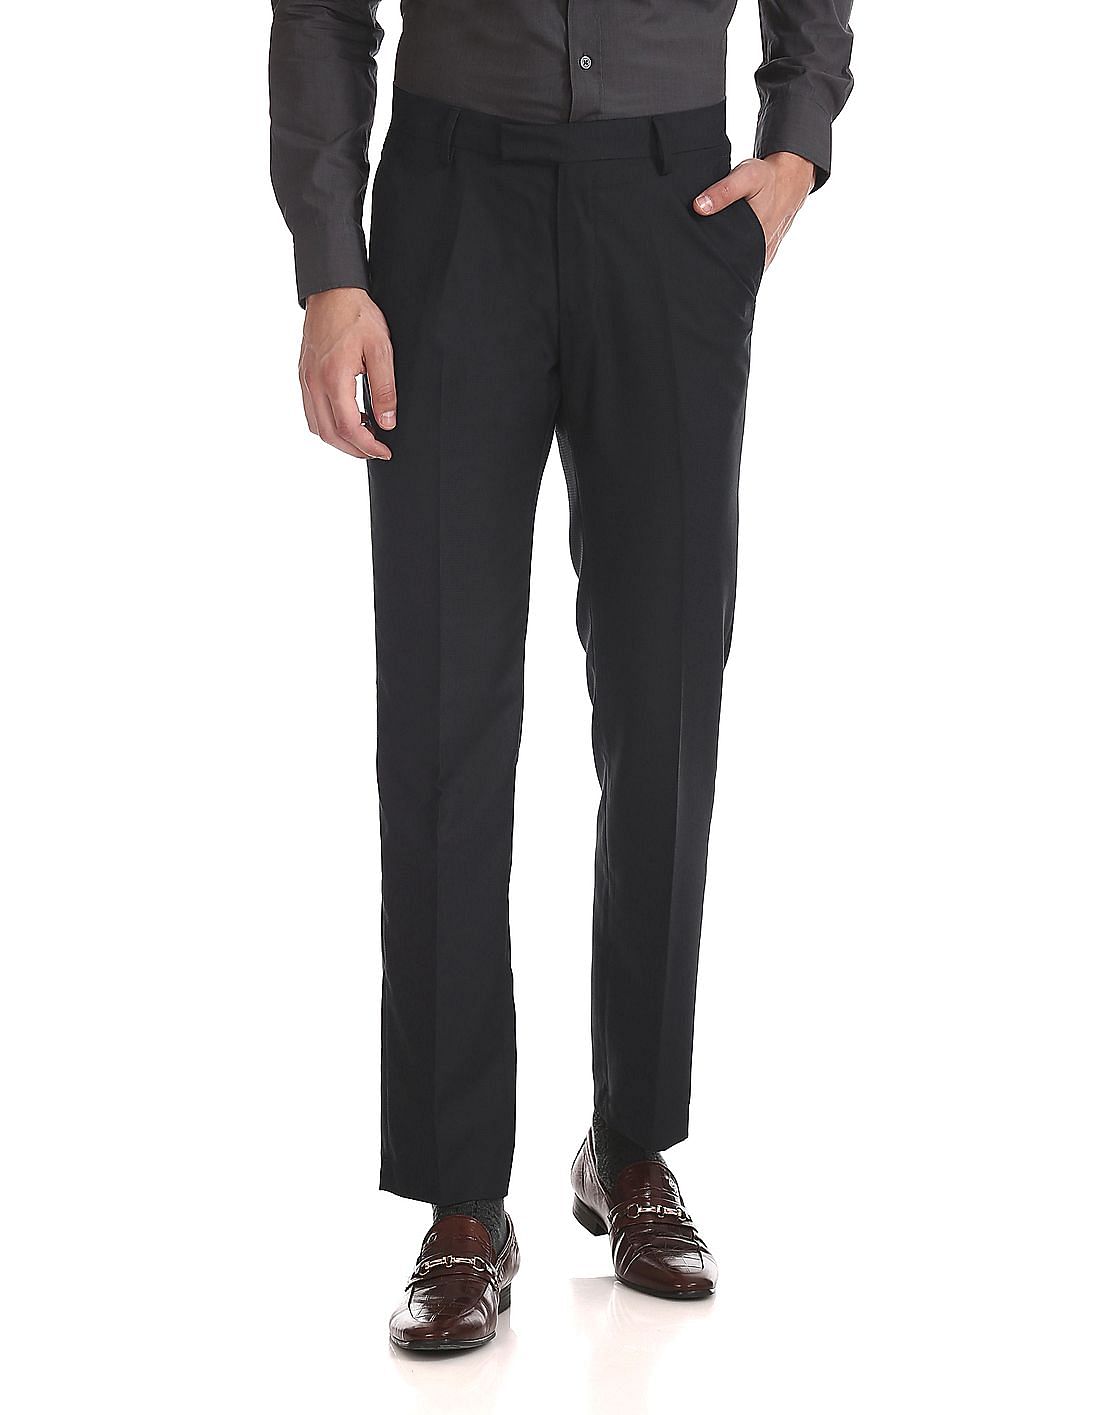 Buy Men Tailored Regular Fit Patterned Trousers online at NNNOW.com